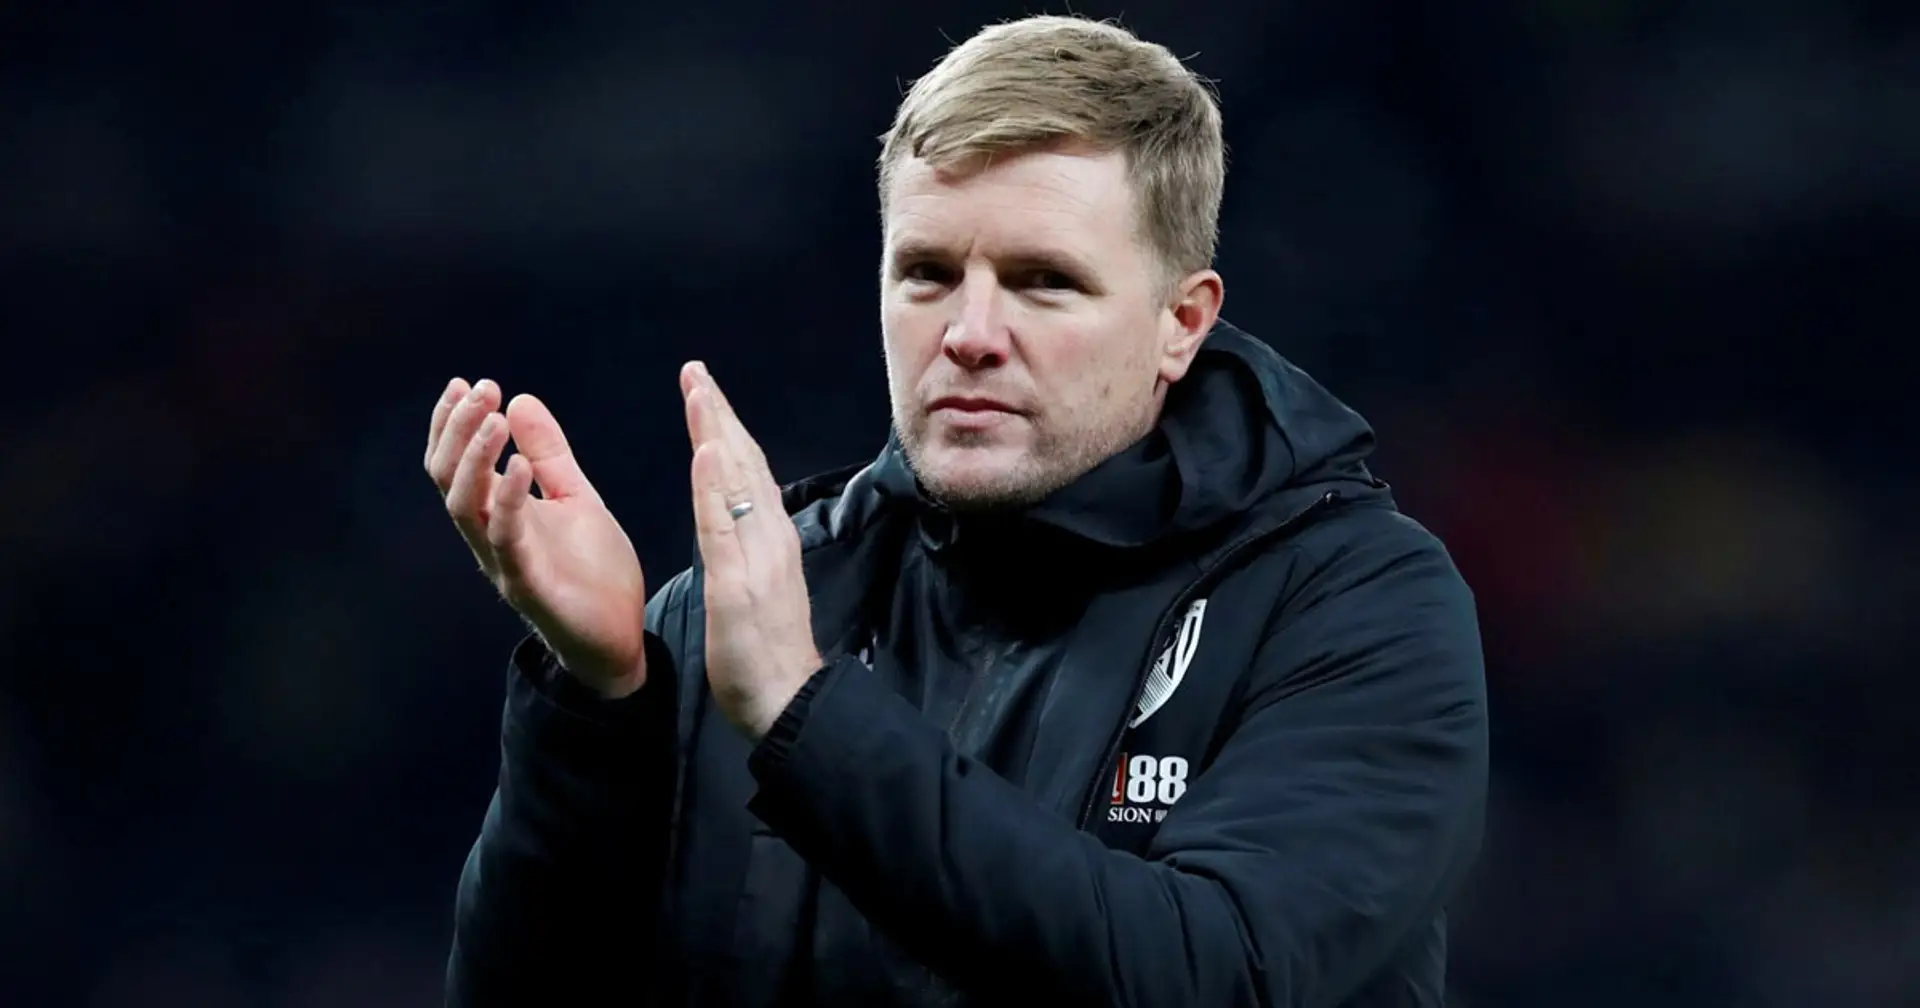 OFFICIAL: Eddie Howe confirmed as Newcastle United manager